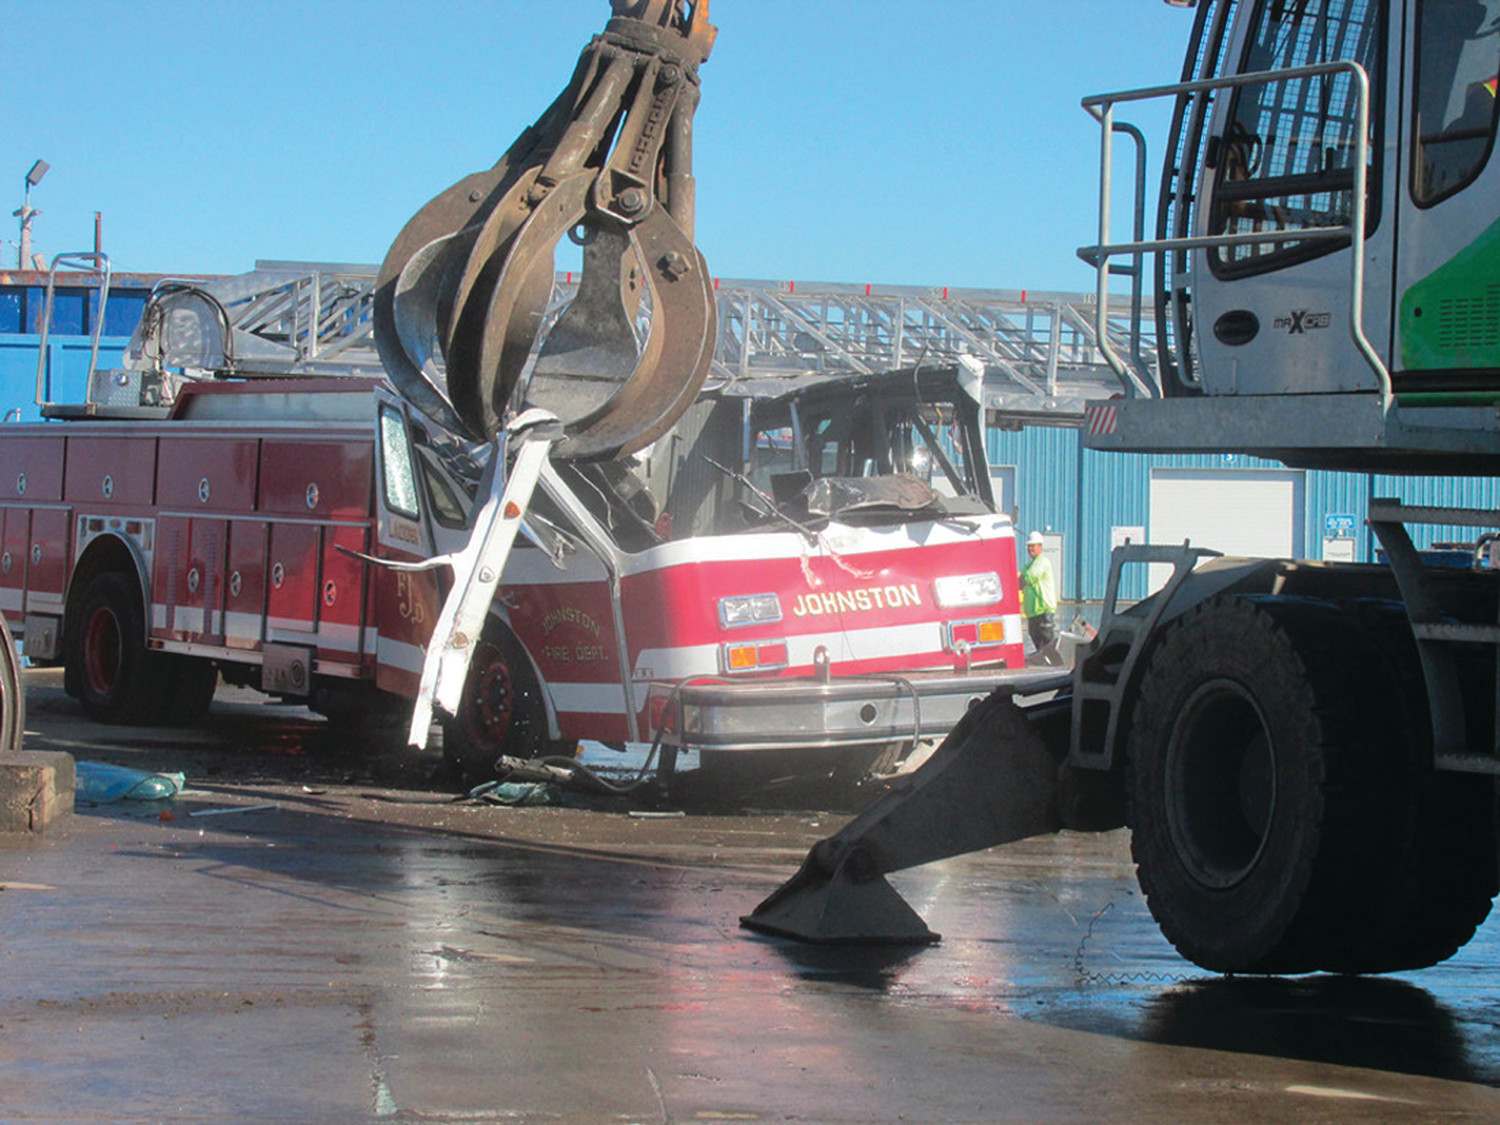 OUT WITH THE OLD: After Sims donated a 2014 Rosenbauer ladder to the town, the company took the Fire Department’s 1991 ladder truck and crushed it at their recycling center.  The company’s recycling operations have come under scrutiny following complaints by neighbors. (Sun Rise photo)